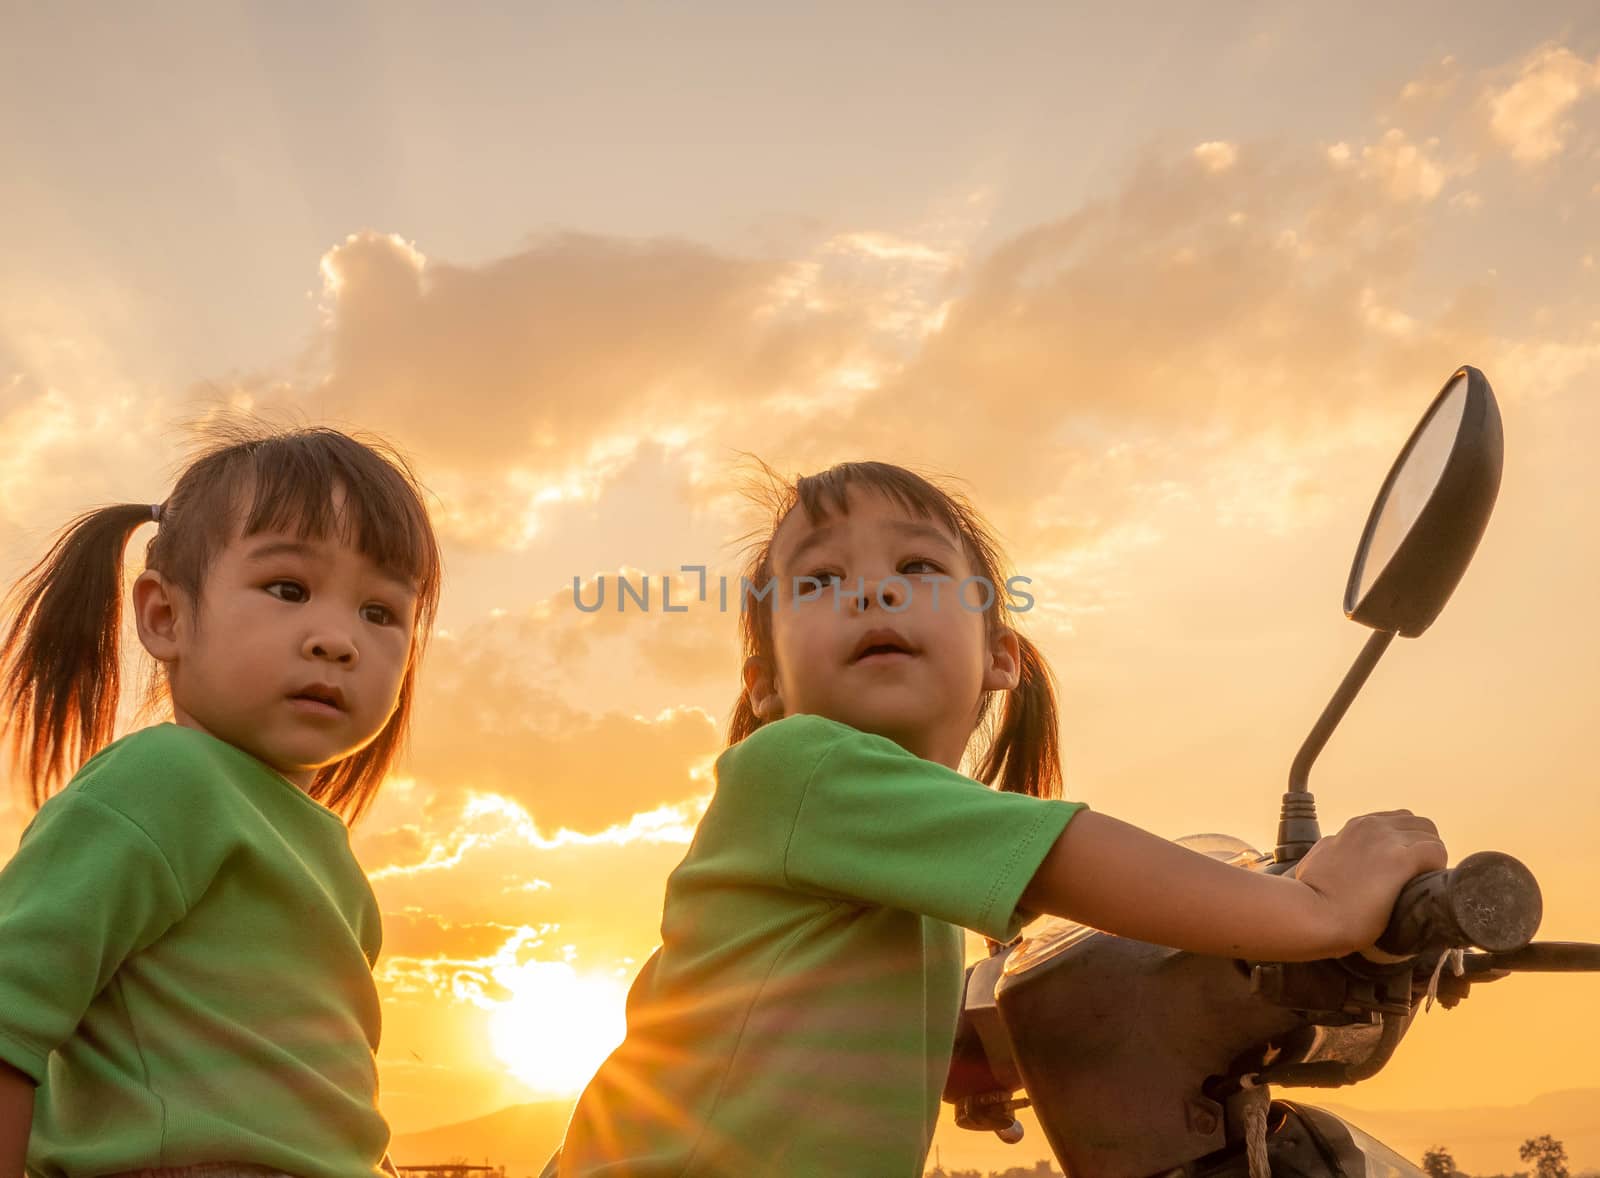 Cute little child girl sitting on motorcycle with her sister over sunset sky background. by TEERASAK